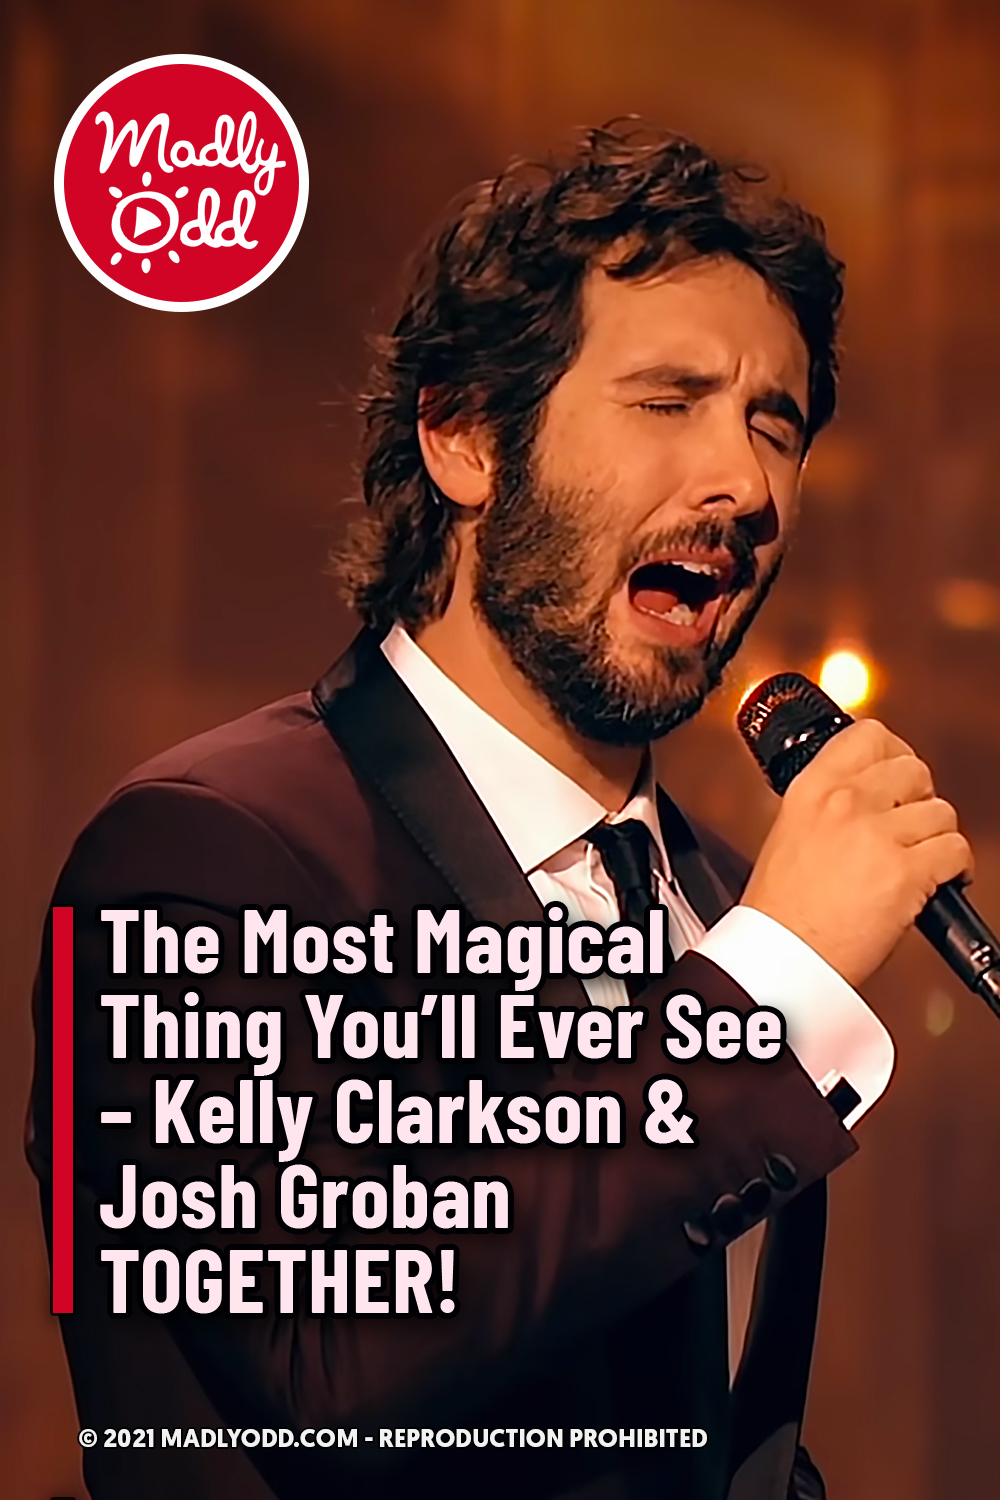 The Most Magical Thing You’ll Ever See - Kelly Clarkson & Josh Groban TOGETHER!